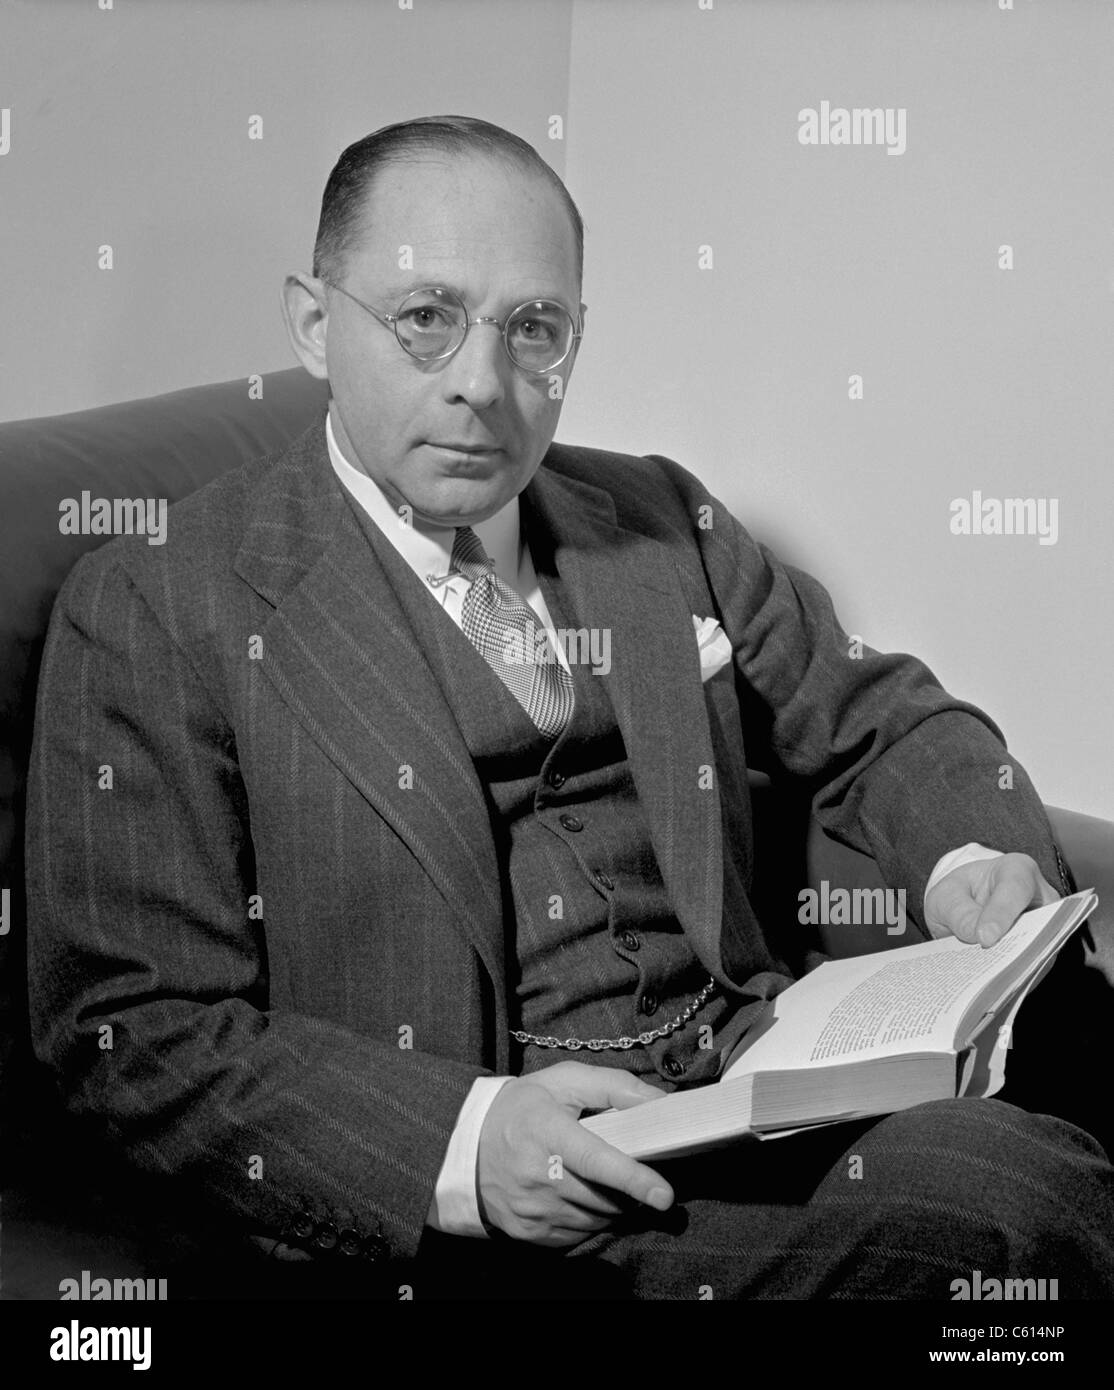 Sidney Weinberg 1891-1969 CEO of Goldman Sachs investment bank during the Great Depression and World War II. Unlike most Wall Streeters he supported FDR and became one of his key economic advisors. He led Goldman Sachs to prominence during the post-wa (BSLOC 2010 18 48) Stock Photo